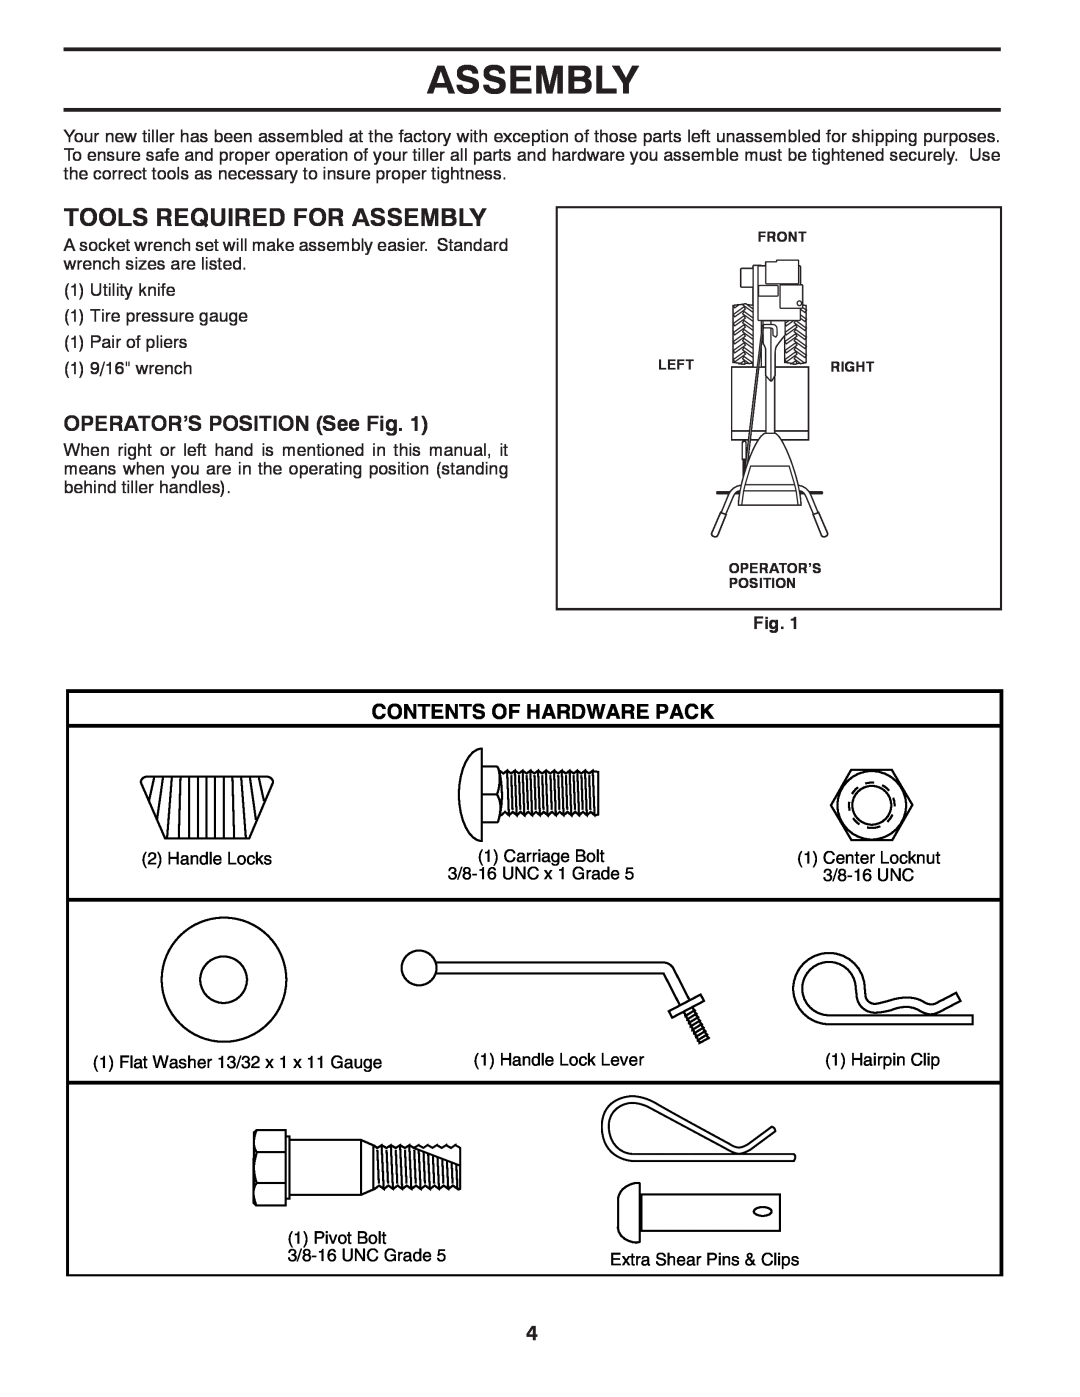 Poulan 433154, DRT900, 96092002300 Tools Required For Assembly, OPERATOR’S POSITION See Fig, Contents Of Hardware Pack 